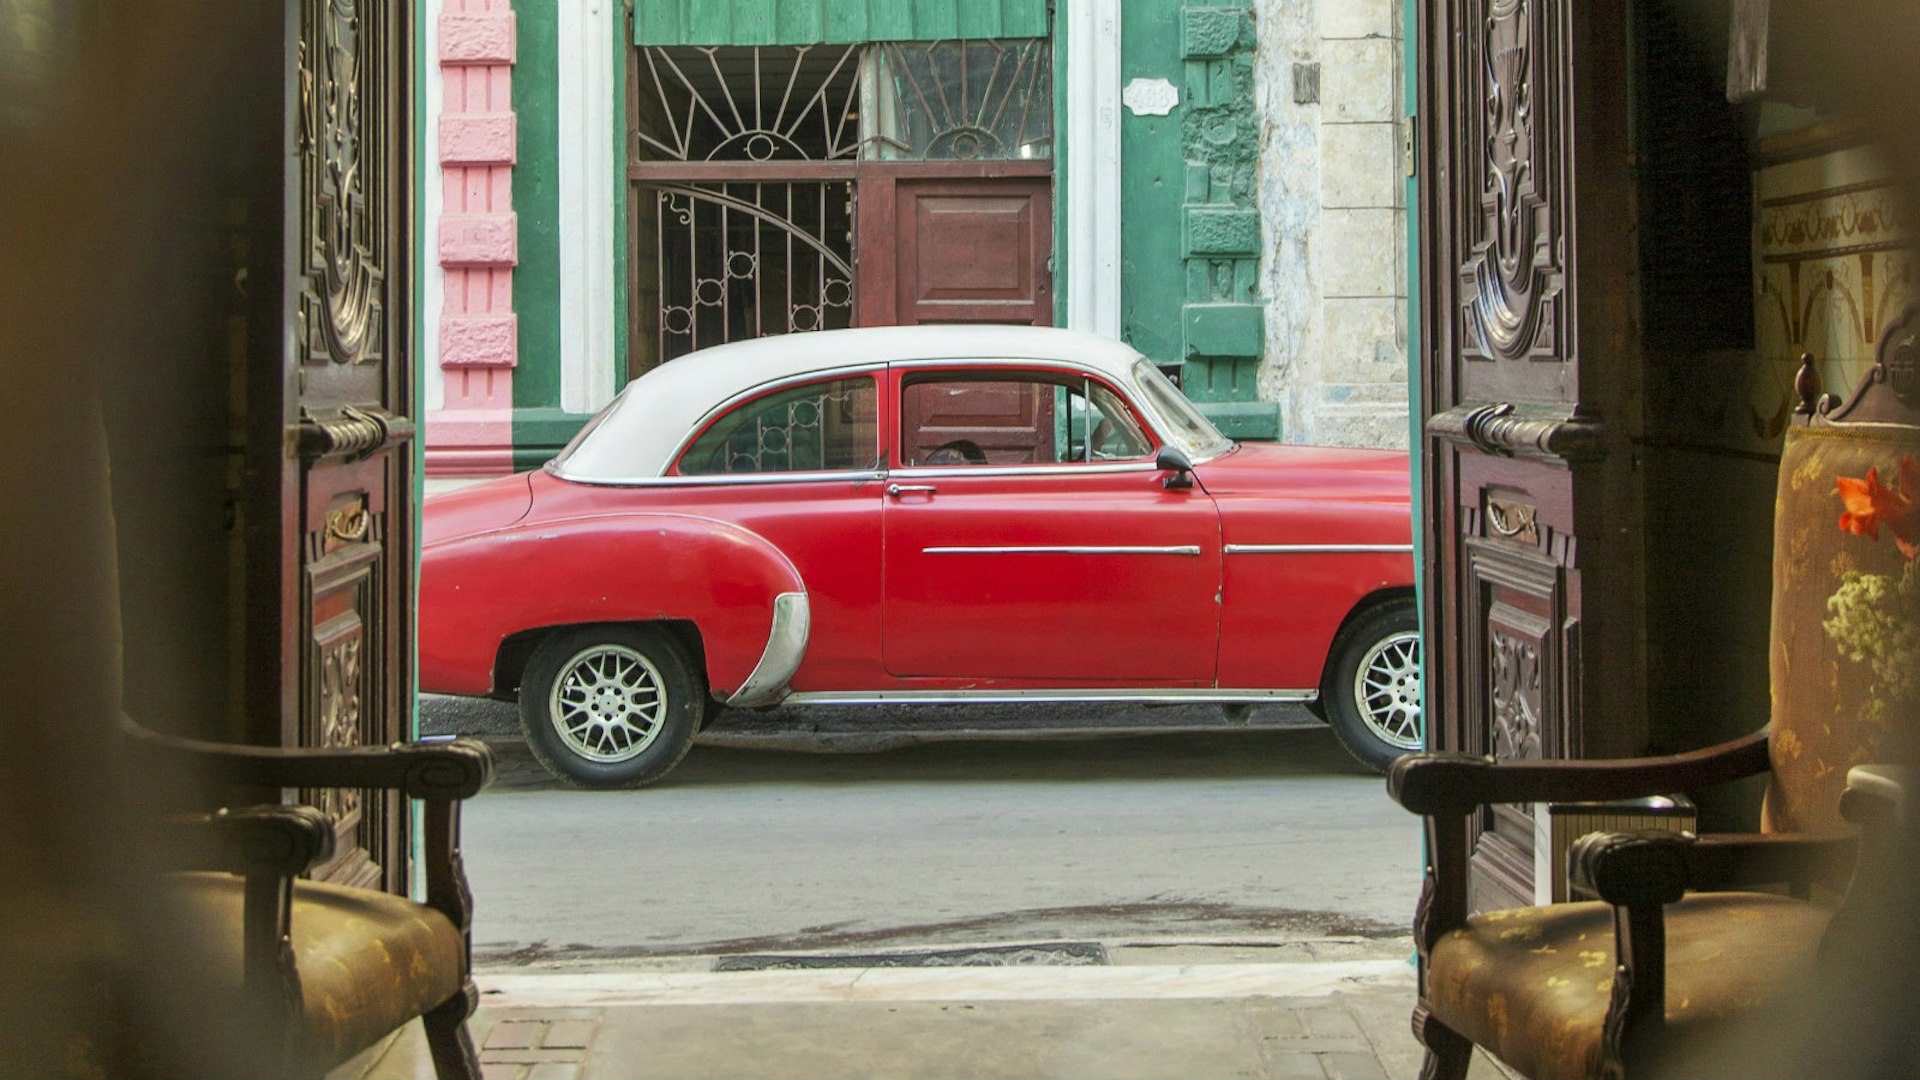 Potent symbols of Cuba adorn the streets of the capital Havana – from classic American cars and crumbling colonial buildings, to cigars and the national flag © Philip Lee Harvey / Lonely Planet